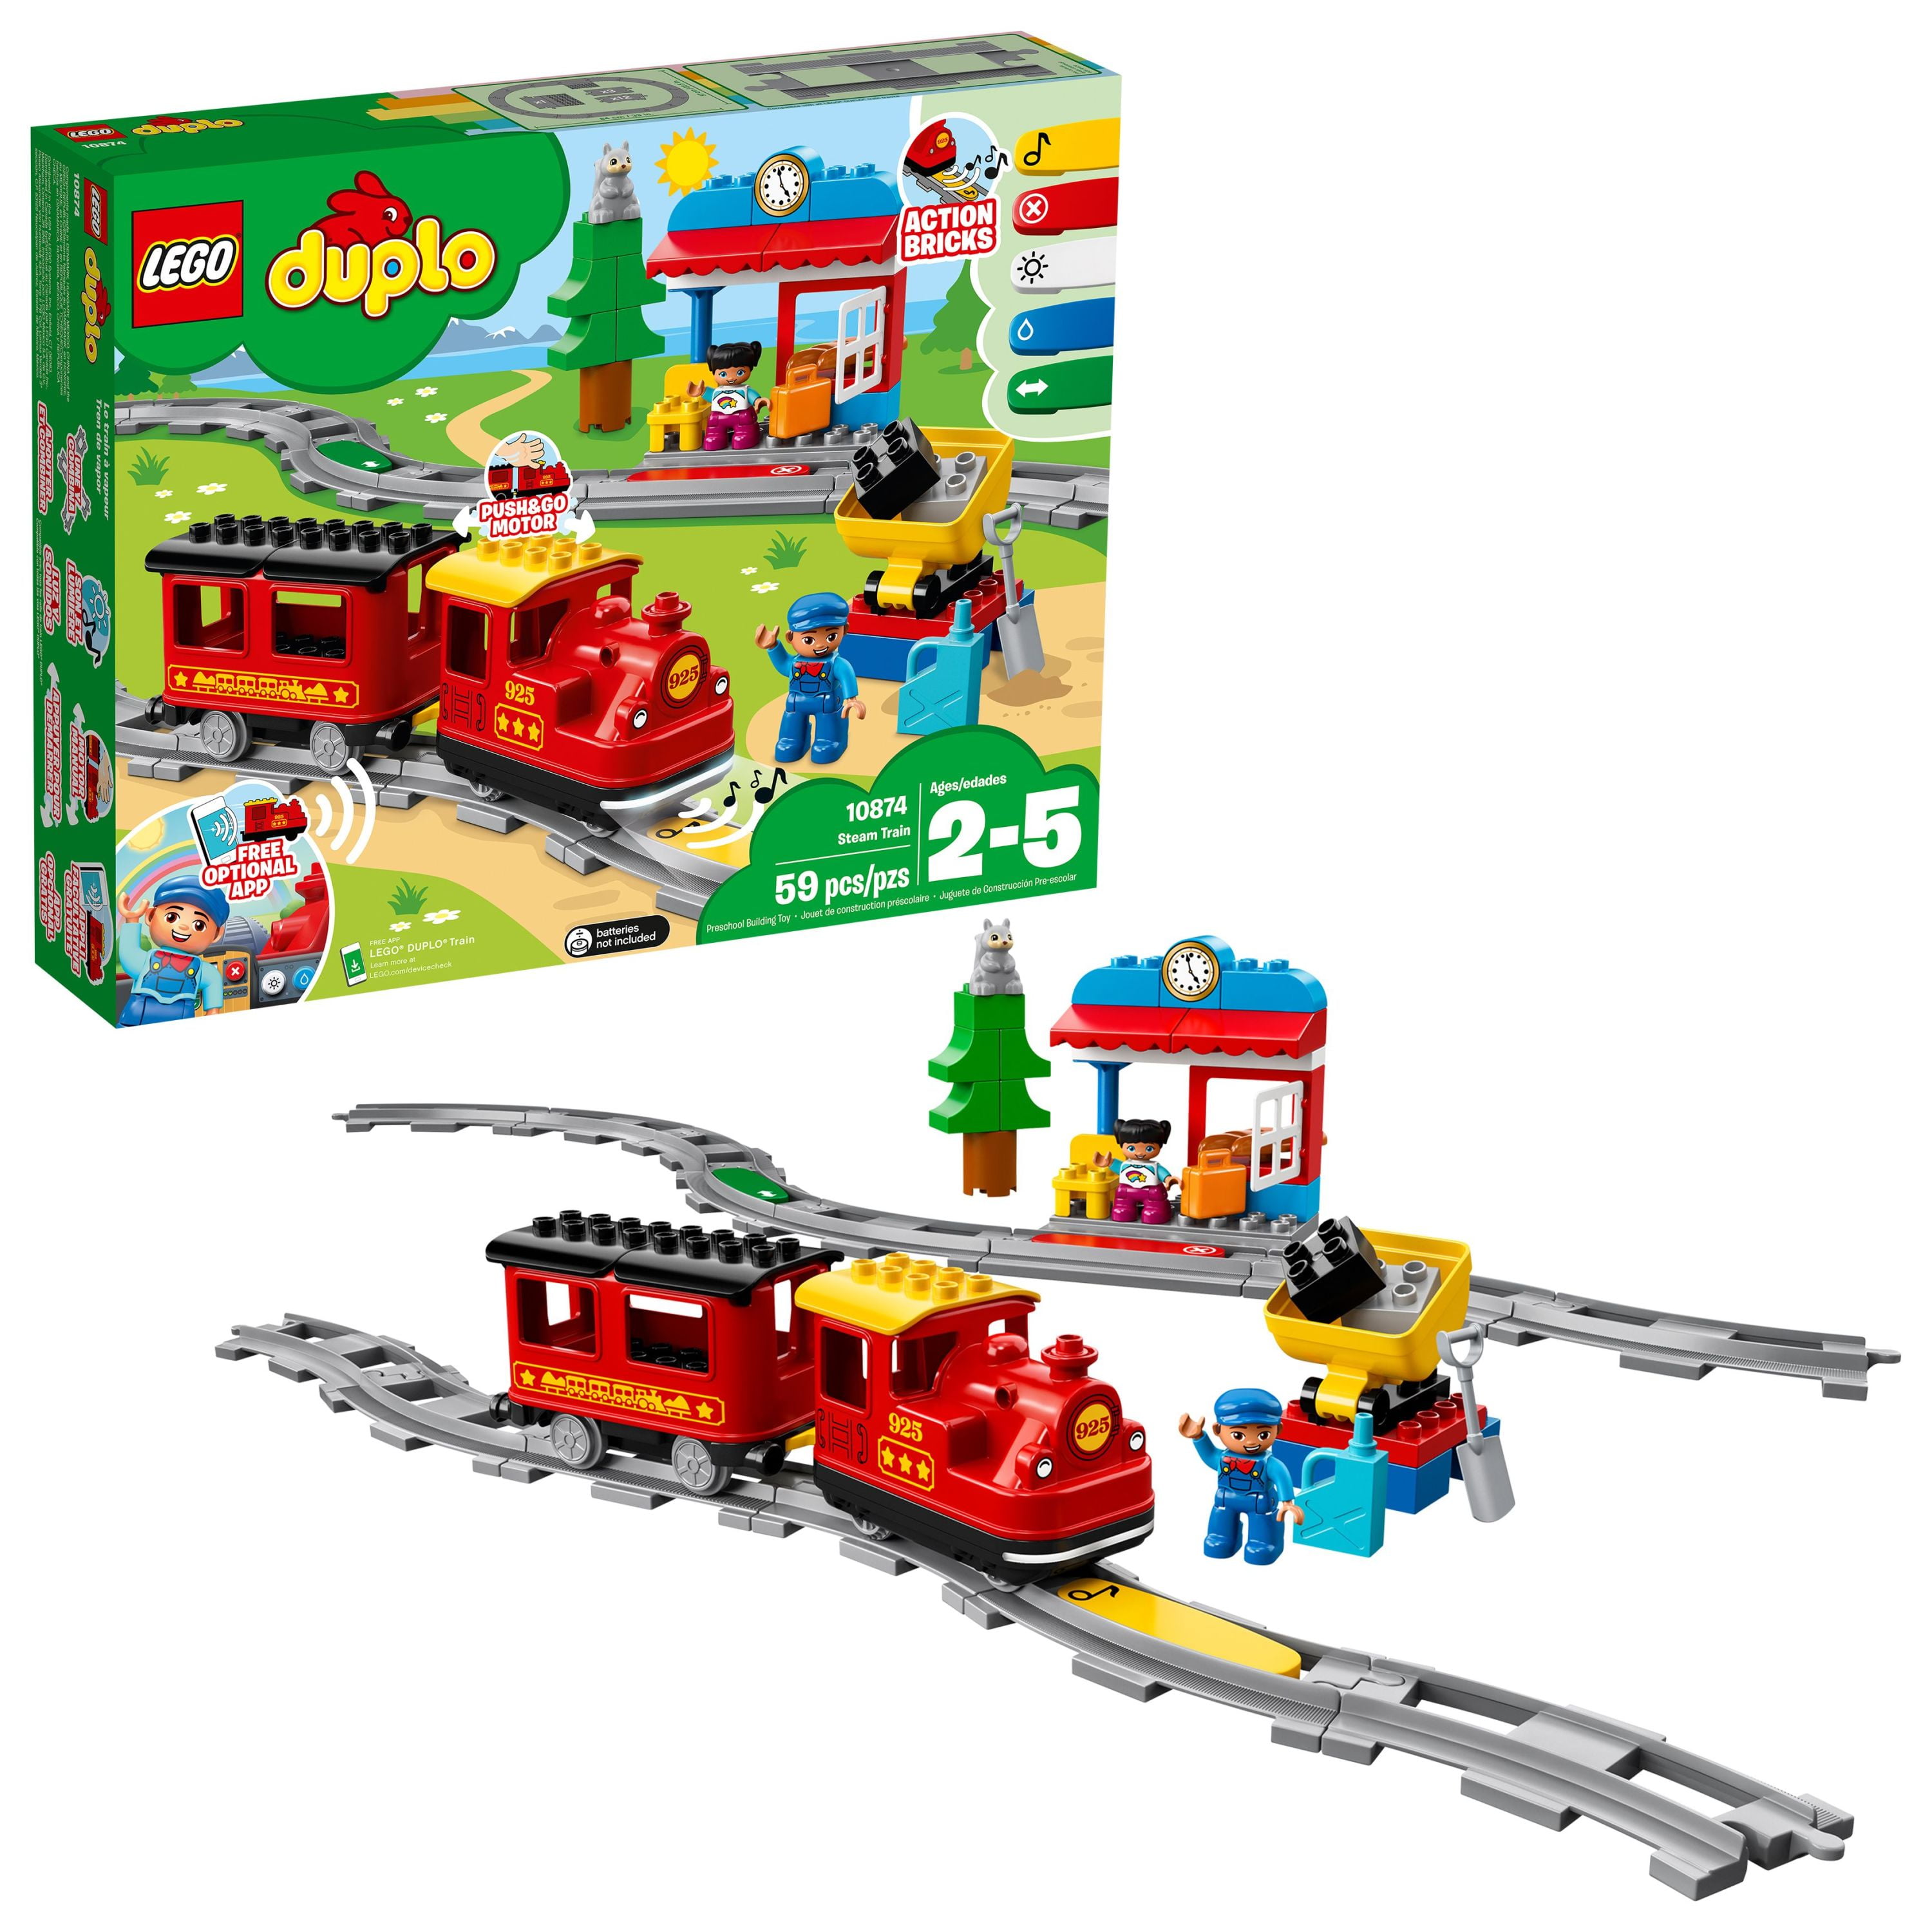 LEGO DUPLO Town Train 10874, Toys for Toddlers, Boys and Girls 2 - 5 Years Old with Light & Sound, Push & Go Battery Powered Set with RC Function, Gift Idea Walmart.com